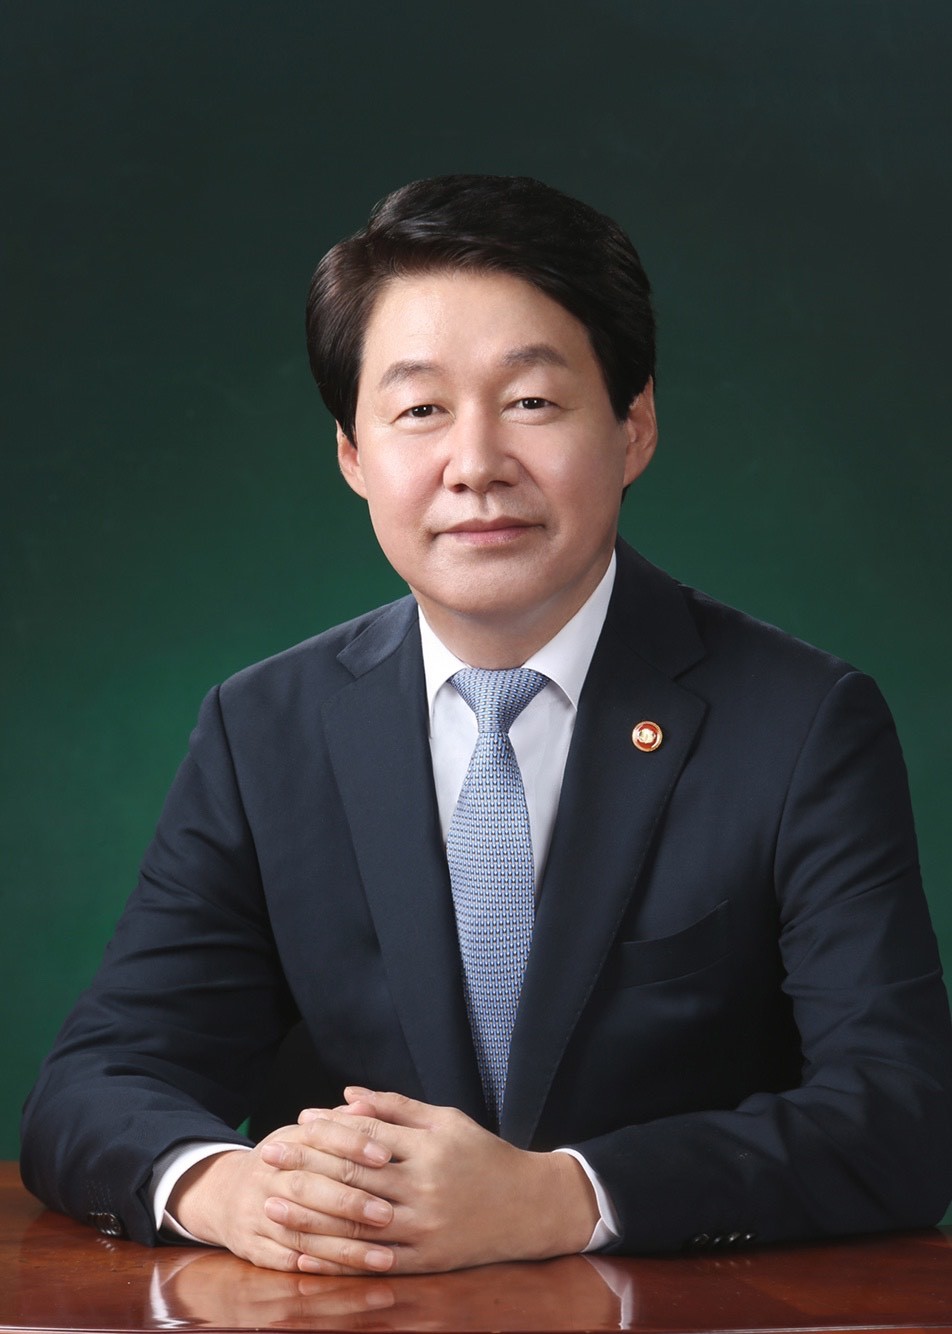 Minister of Employment and Labor An Kyung-duk